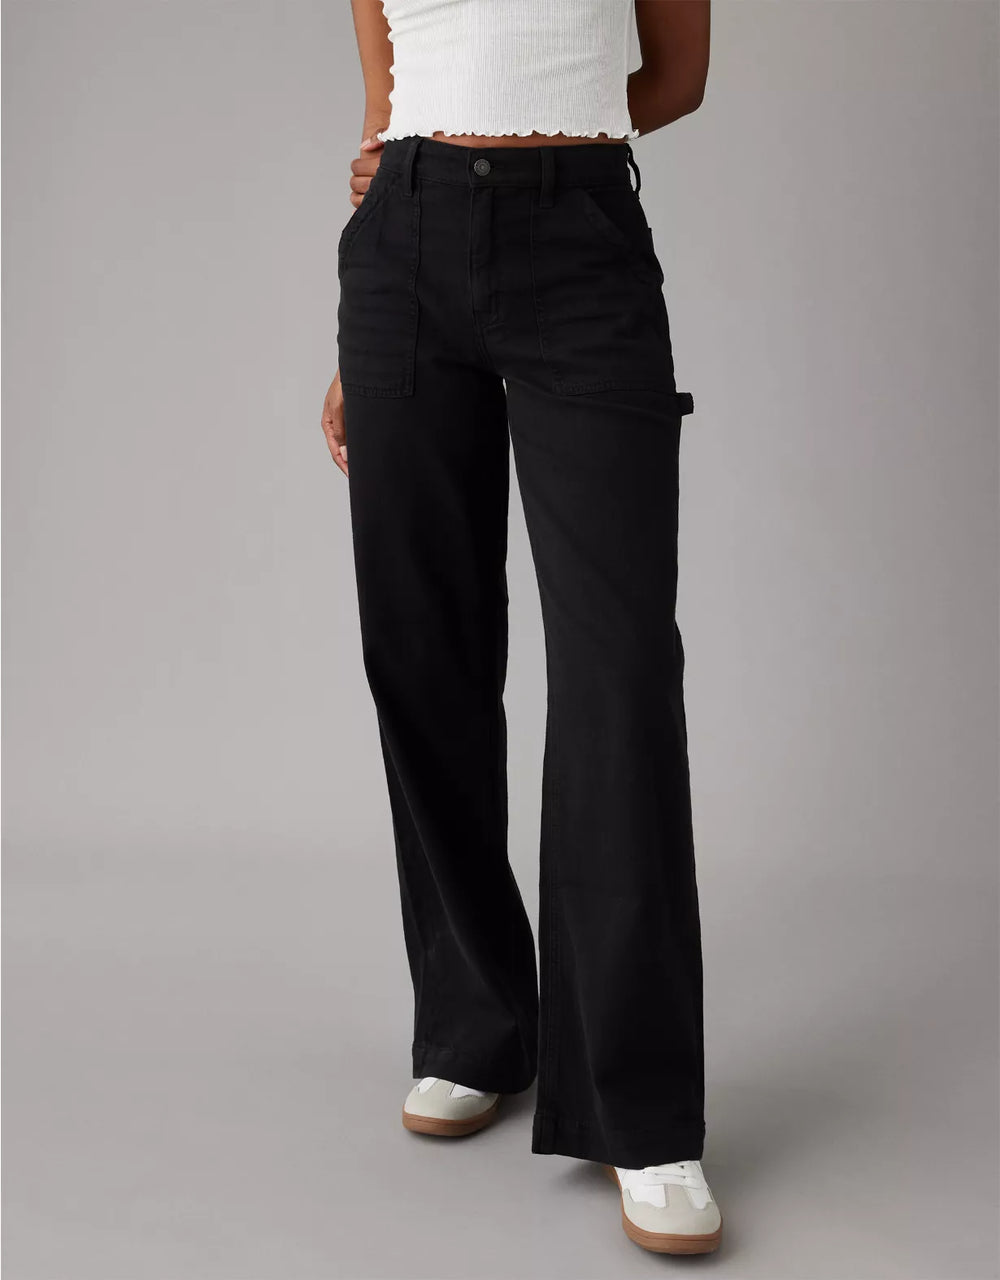 13 Petite Cargo Pants For Women That You Won't Have To Hem